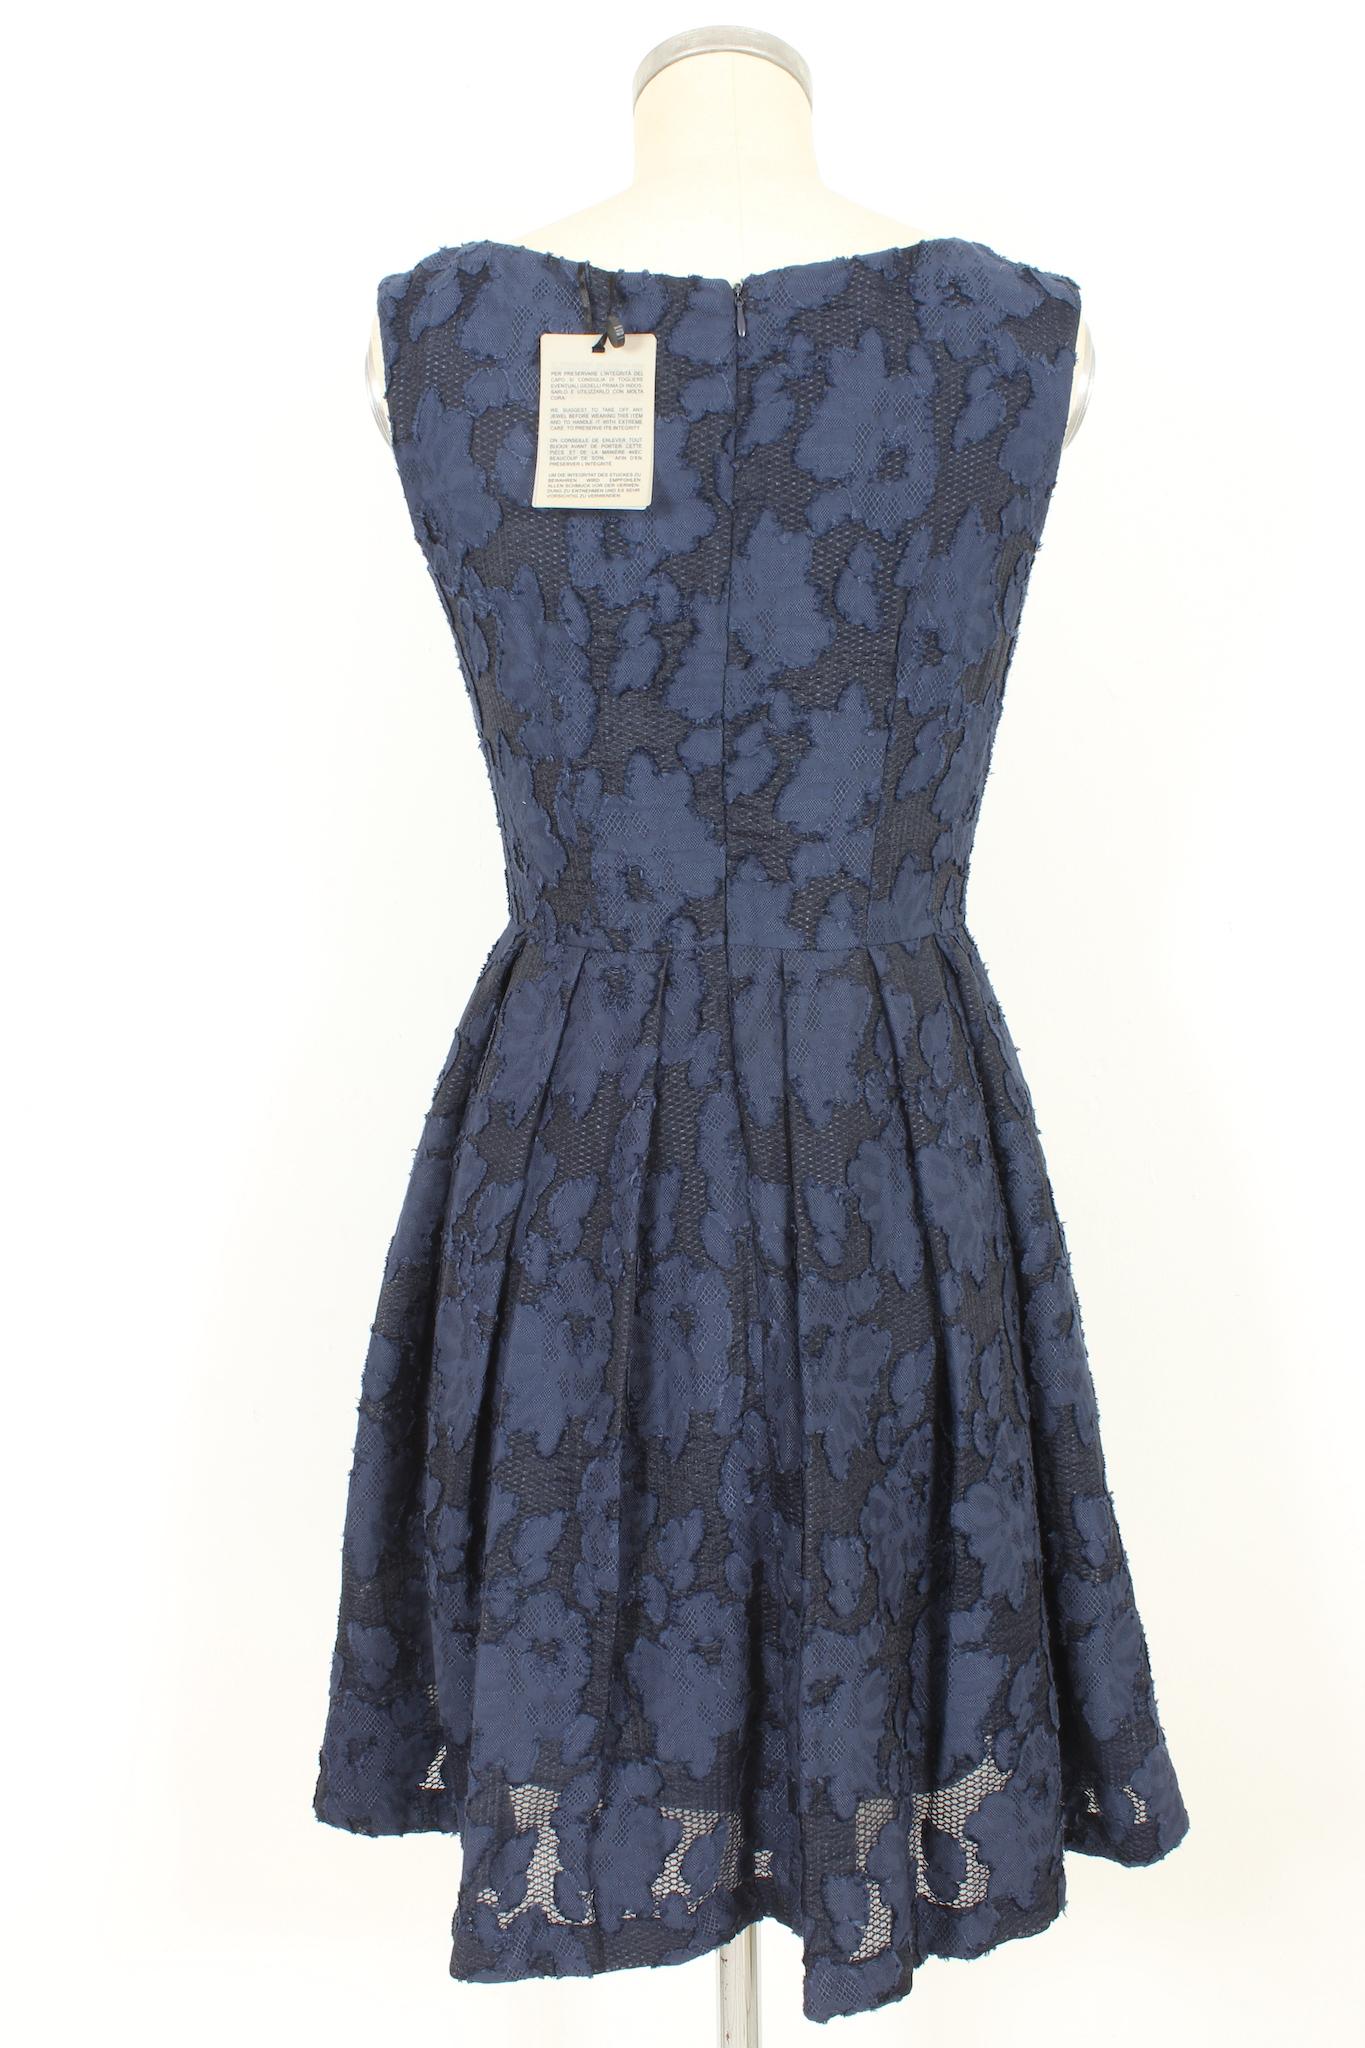 Blumarine by blugirl elegant dress 2000s. Blue flared sheath dress, floral lace pattern. Zipper closure on the back. Fabric 76% viscose, 24% polyimide. Made in italy.

Size: 42 It 8 Us 10 Uk

Shoulder: 40cm
Bust/Chest: 45 cm
Waist: 35 cm
Length: 93